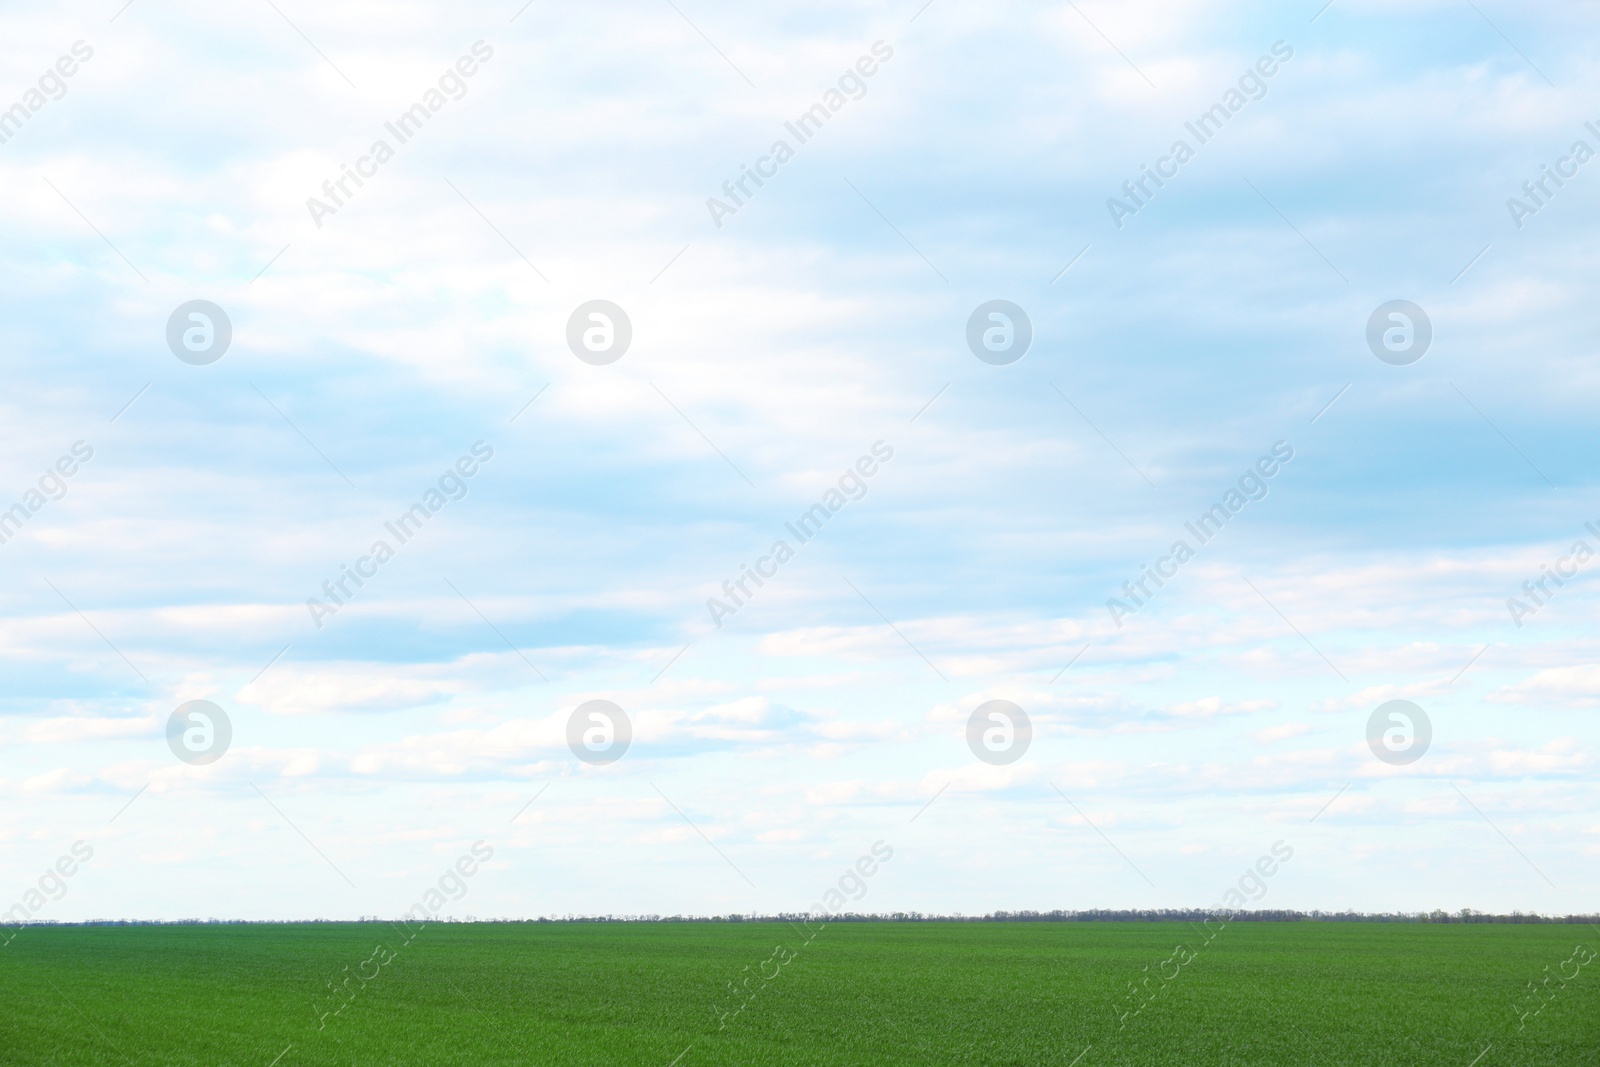 Photo of Picturesque view of green agricultural field on cloudy day